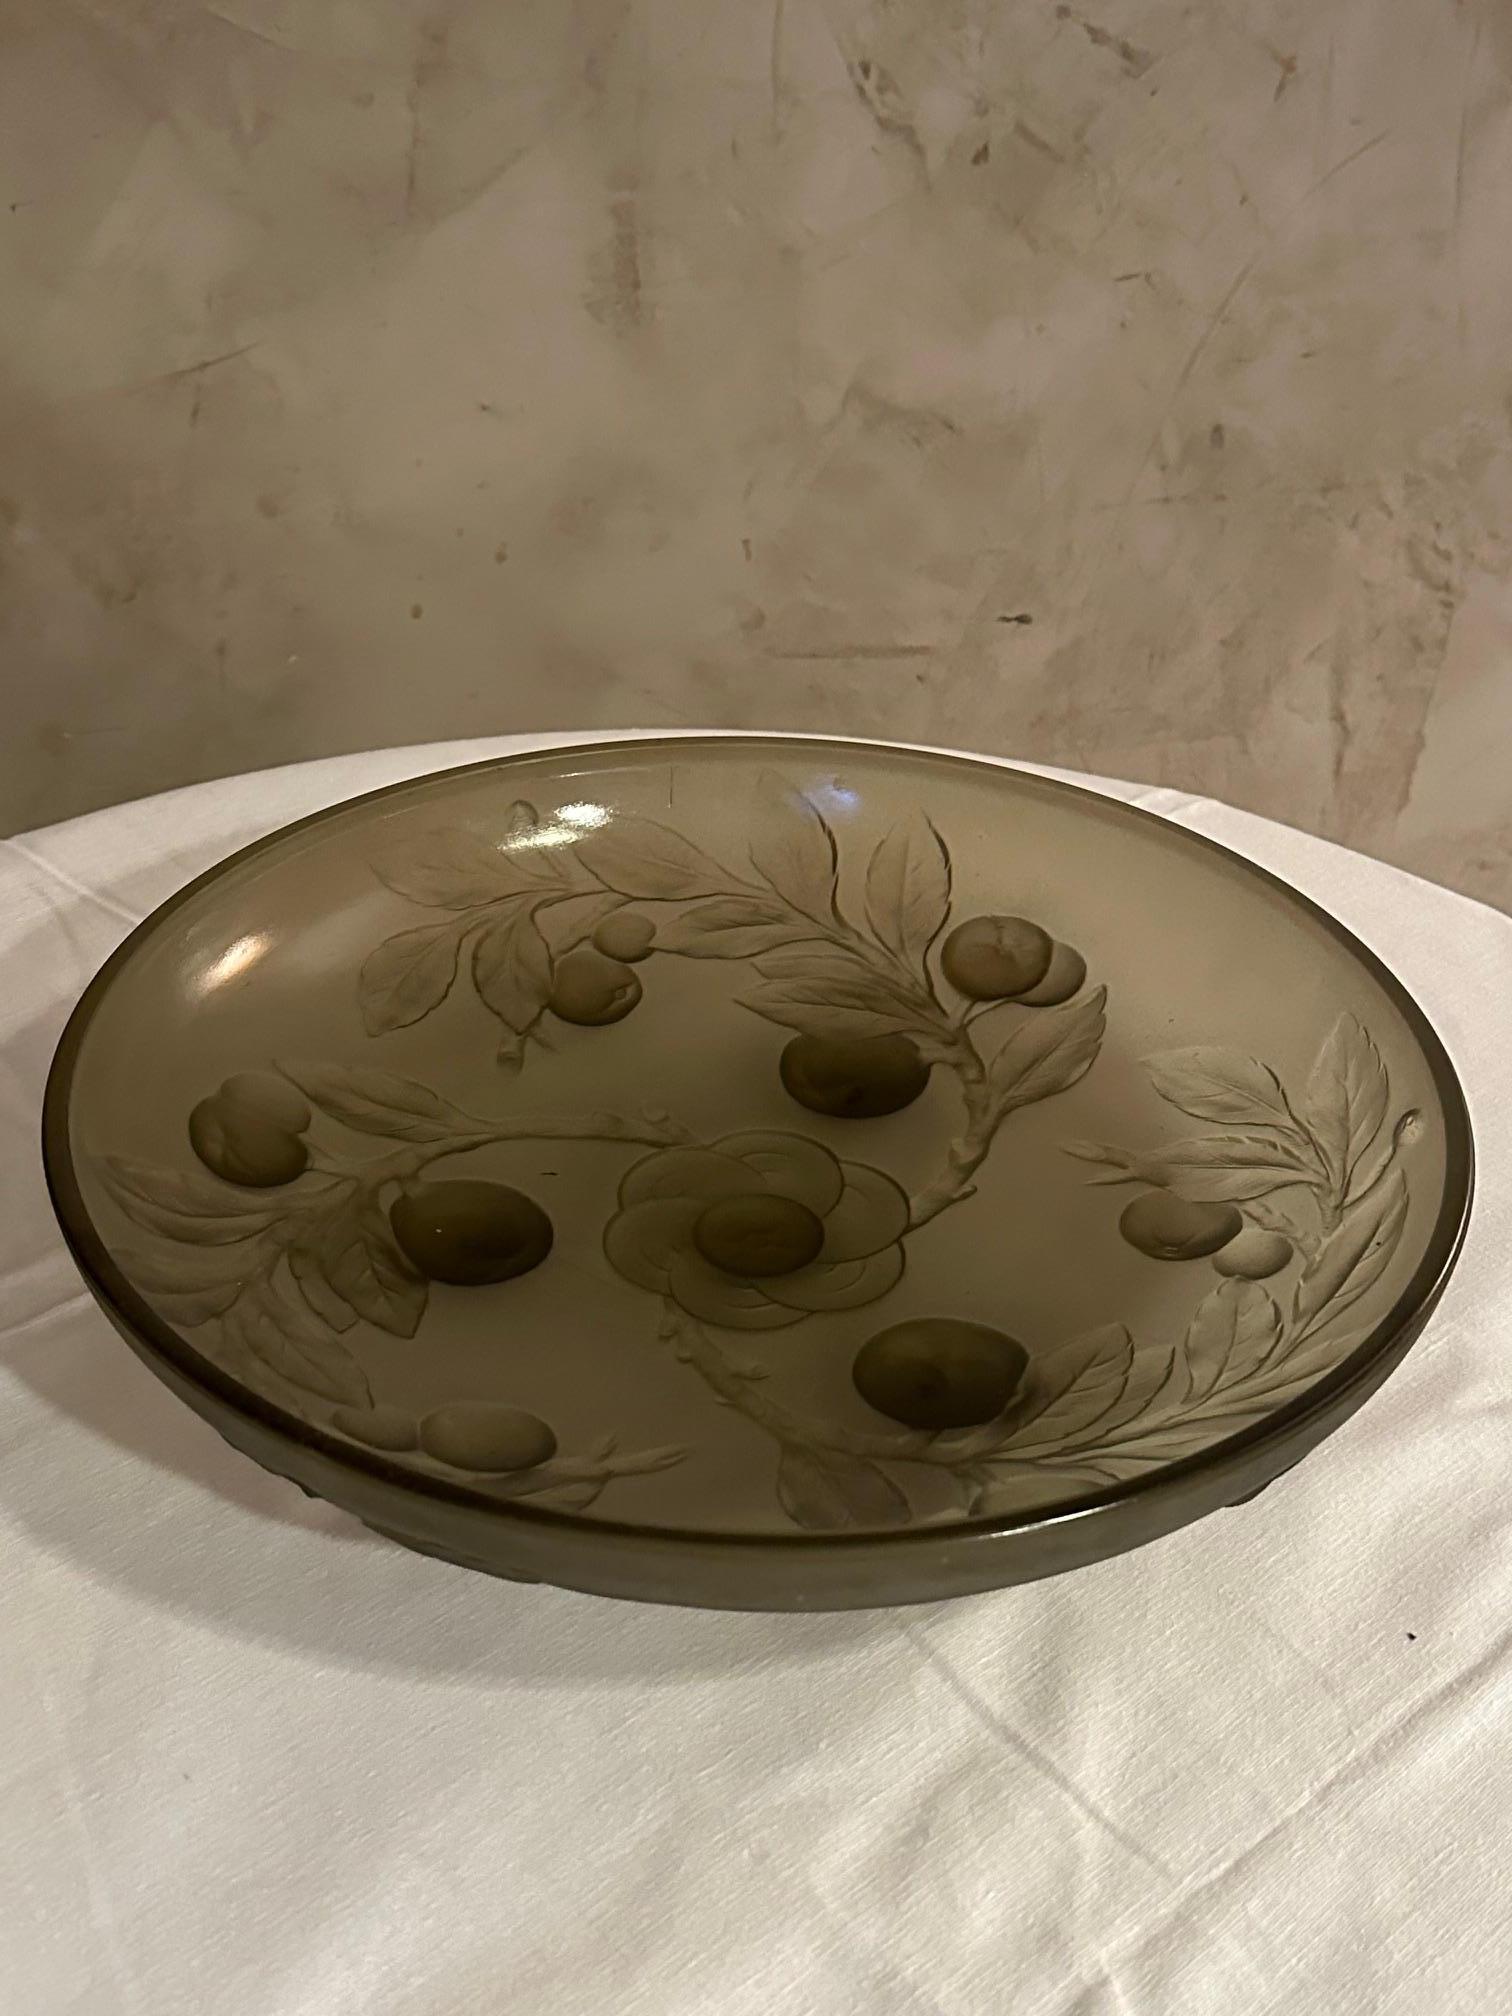 20th century French Art deco Glass Fruit Decorative Bowl, 1930s For Sale 5